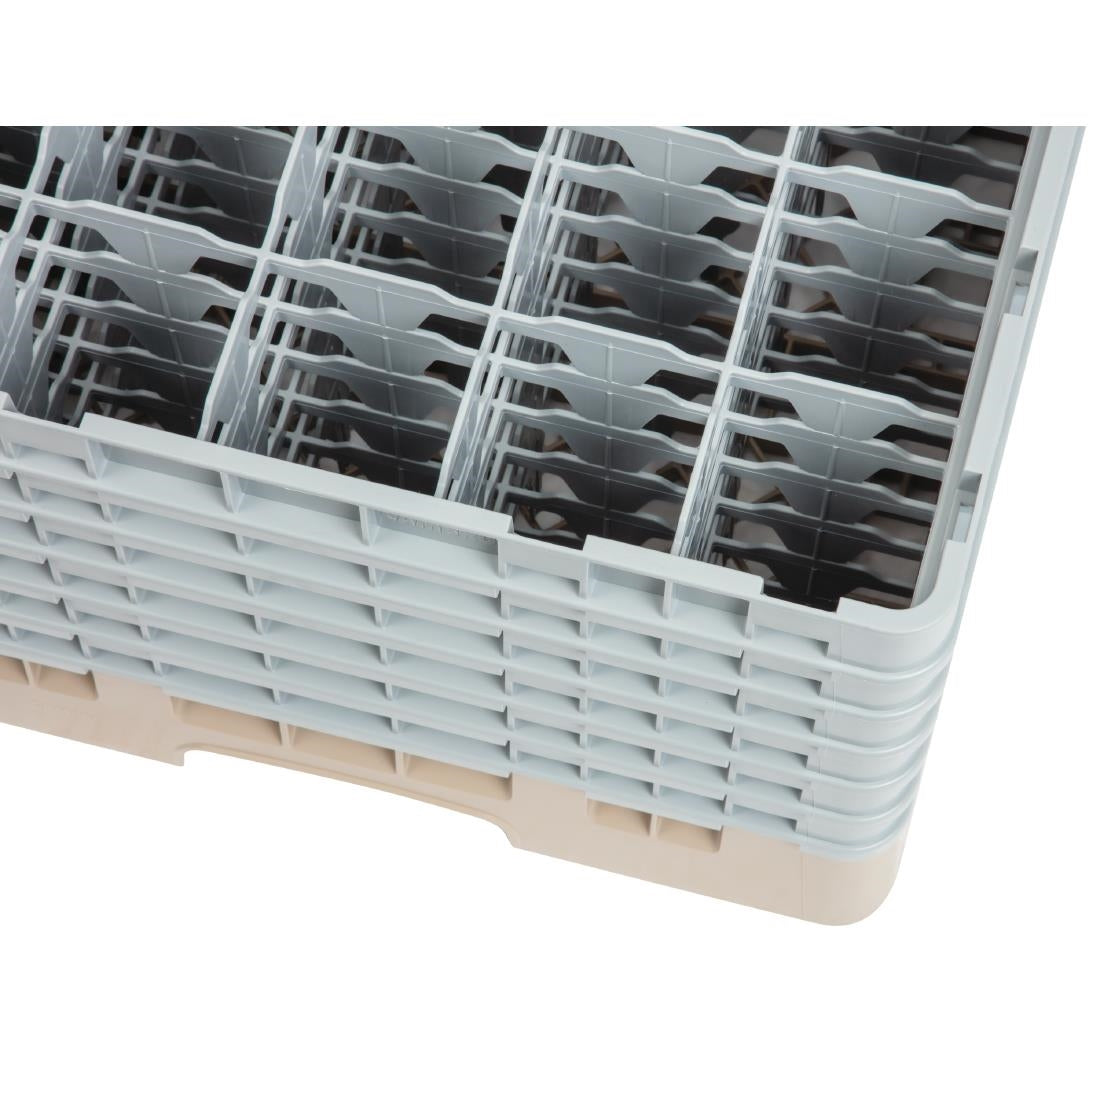 Cambro Camrack Beige 25 Compartments Max Glass Height 298mm JD Catering Equipment Solutions Ltd